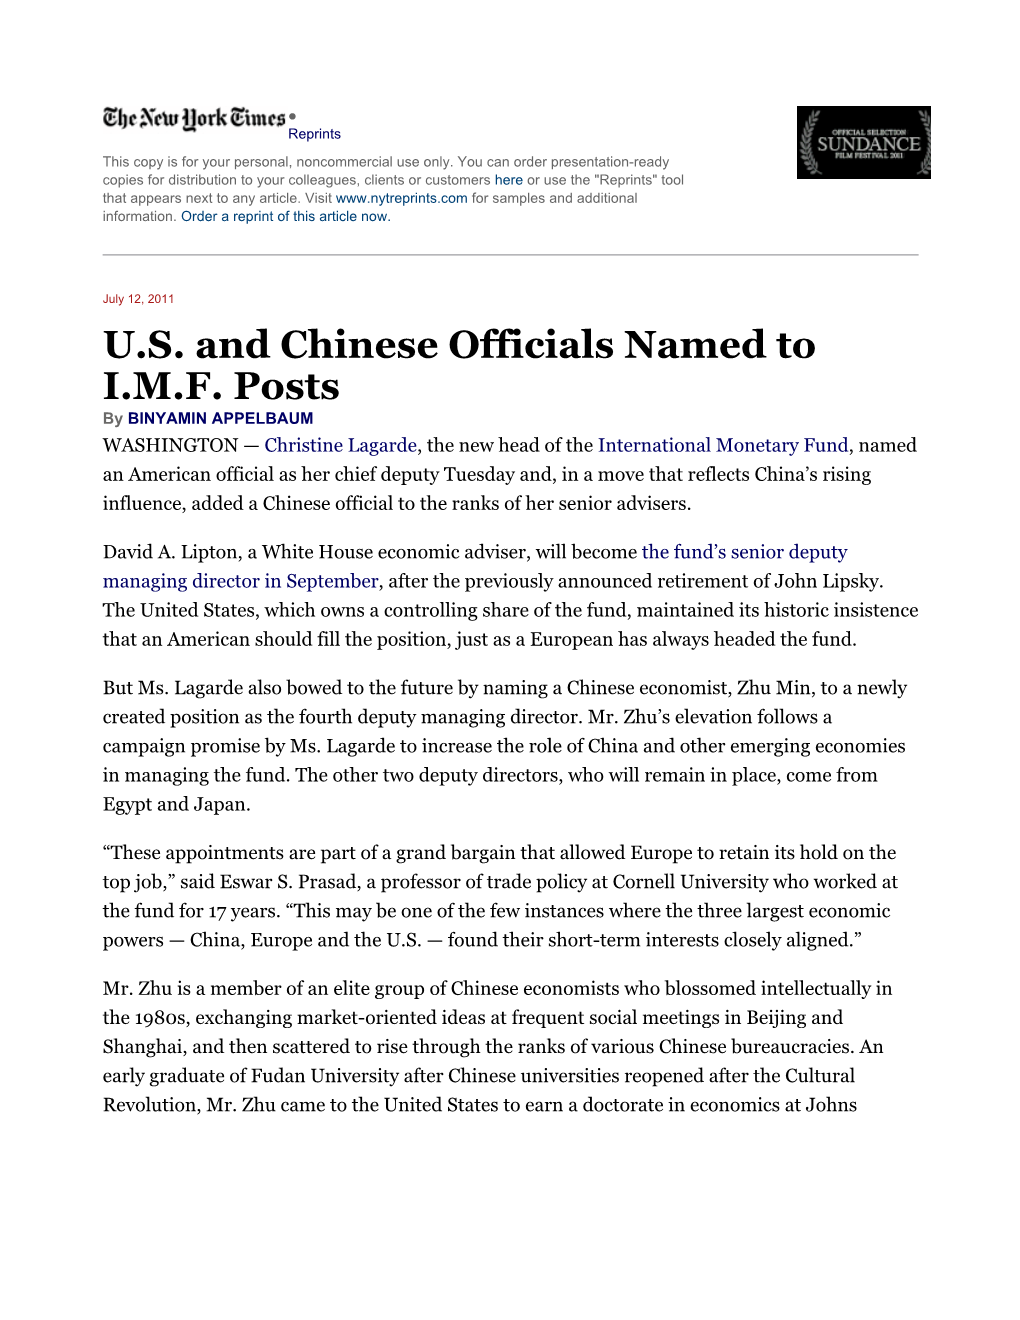 U.S. and Chinese Officials Named to I.M.F. Posts